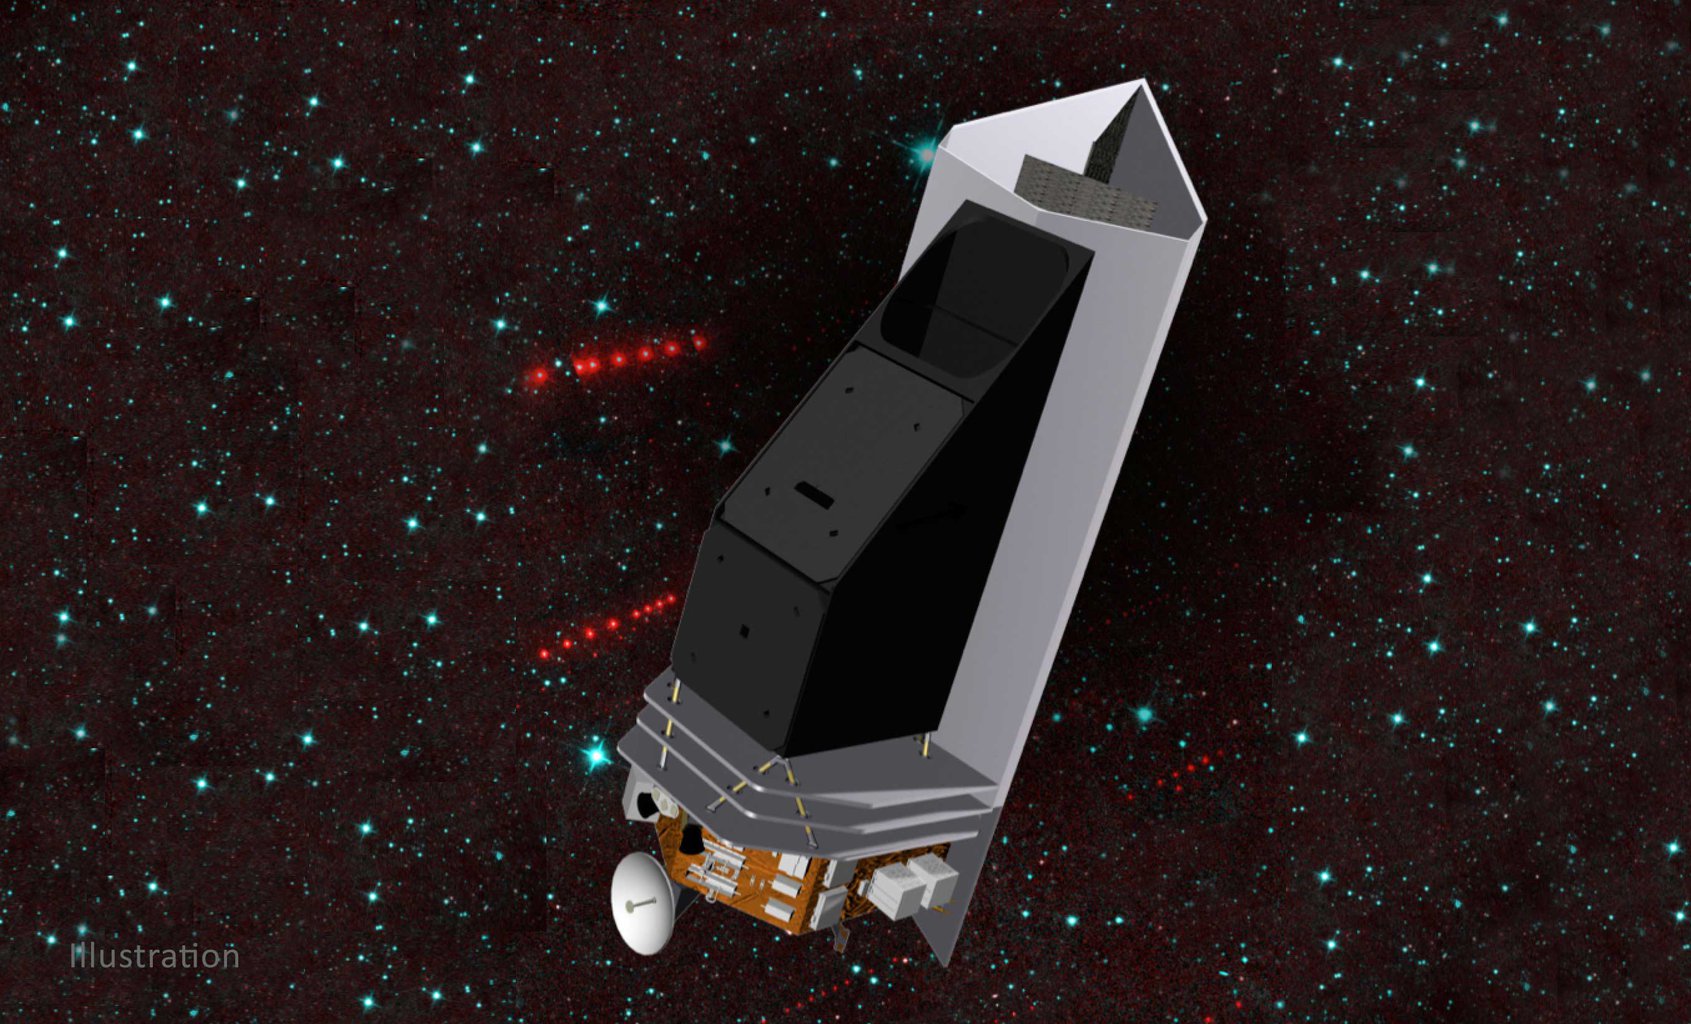 The NEO Surveyor spacecraft won’t have the issue of observational blind spots when hunting for asteroids.